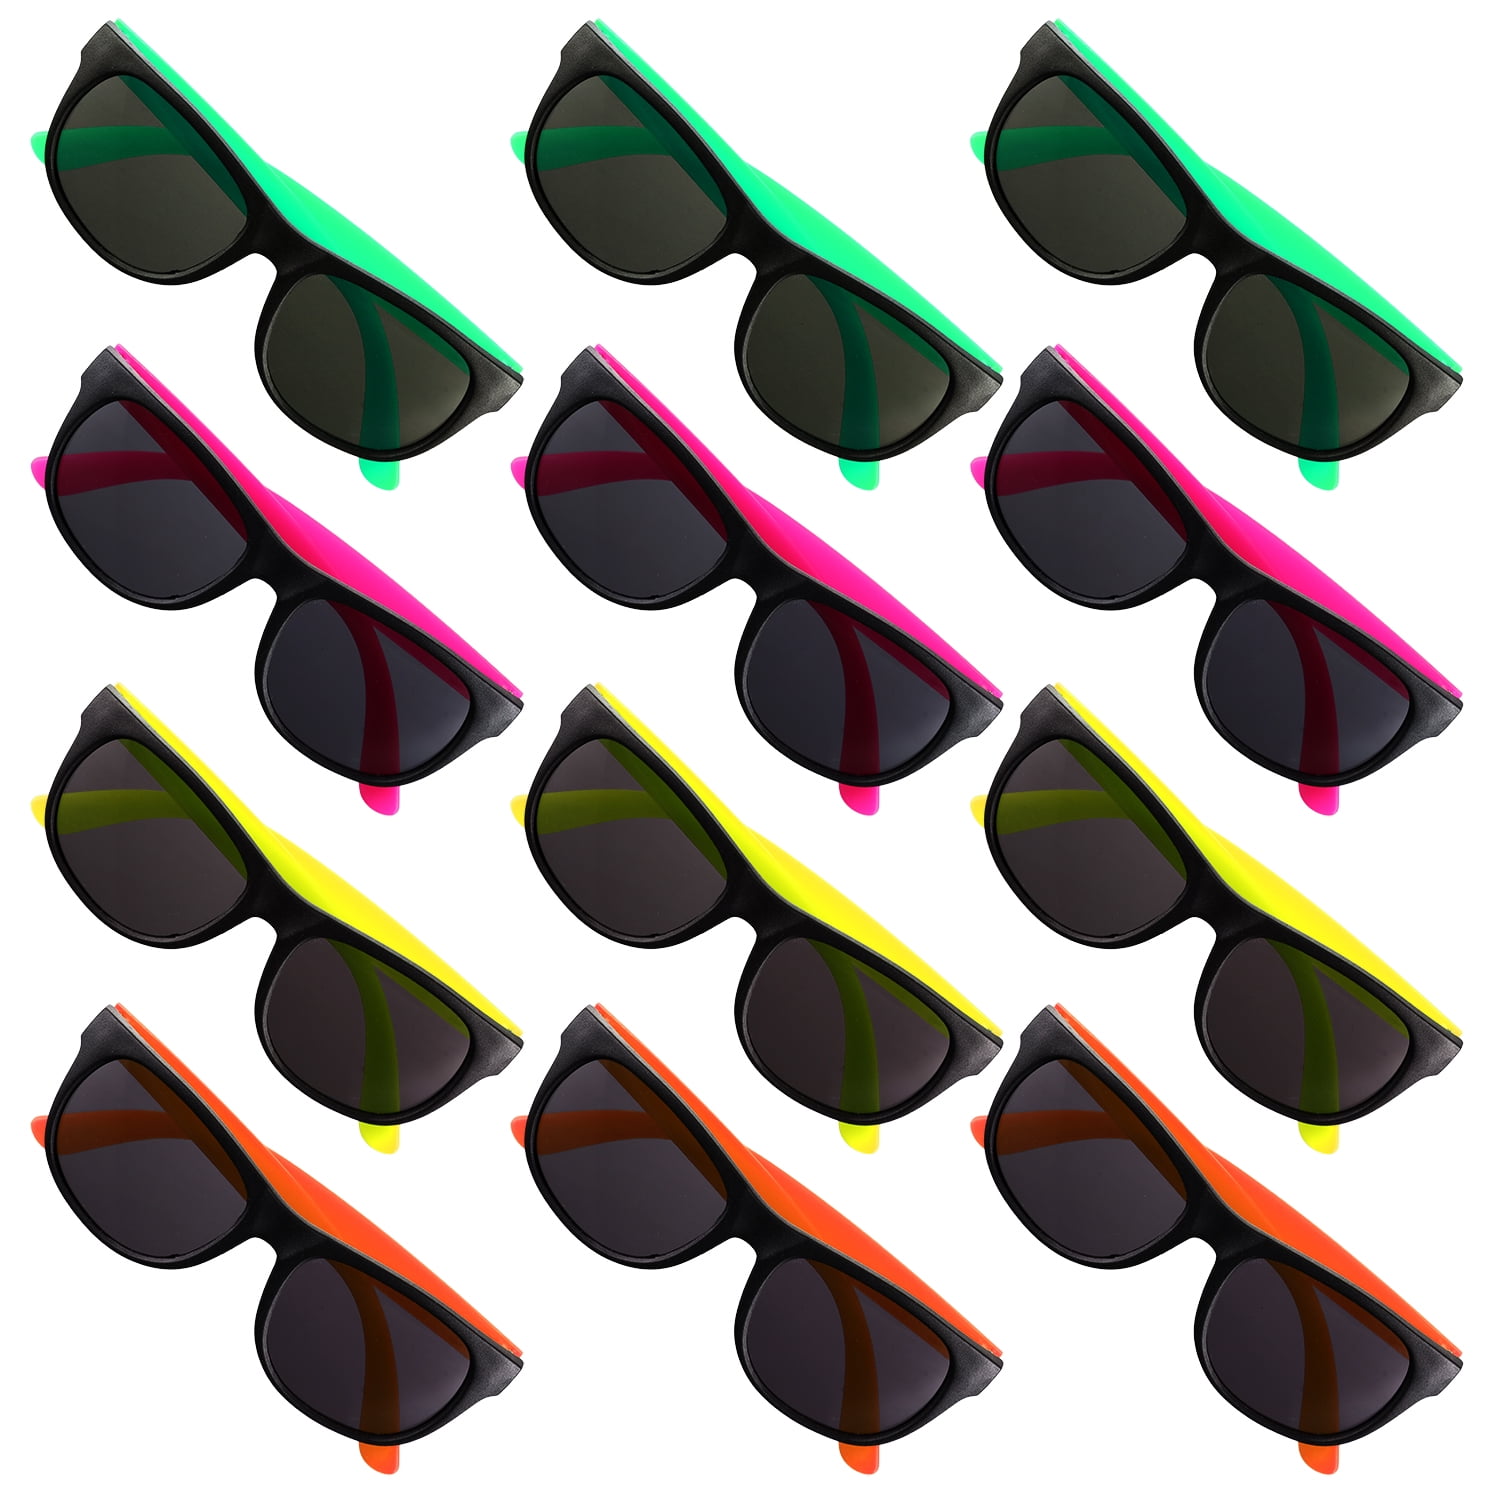 Neon Bulk Sunglasses - 12 Pieces - 5.5 Inches - Ideal for Kids and